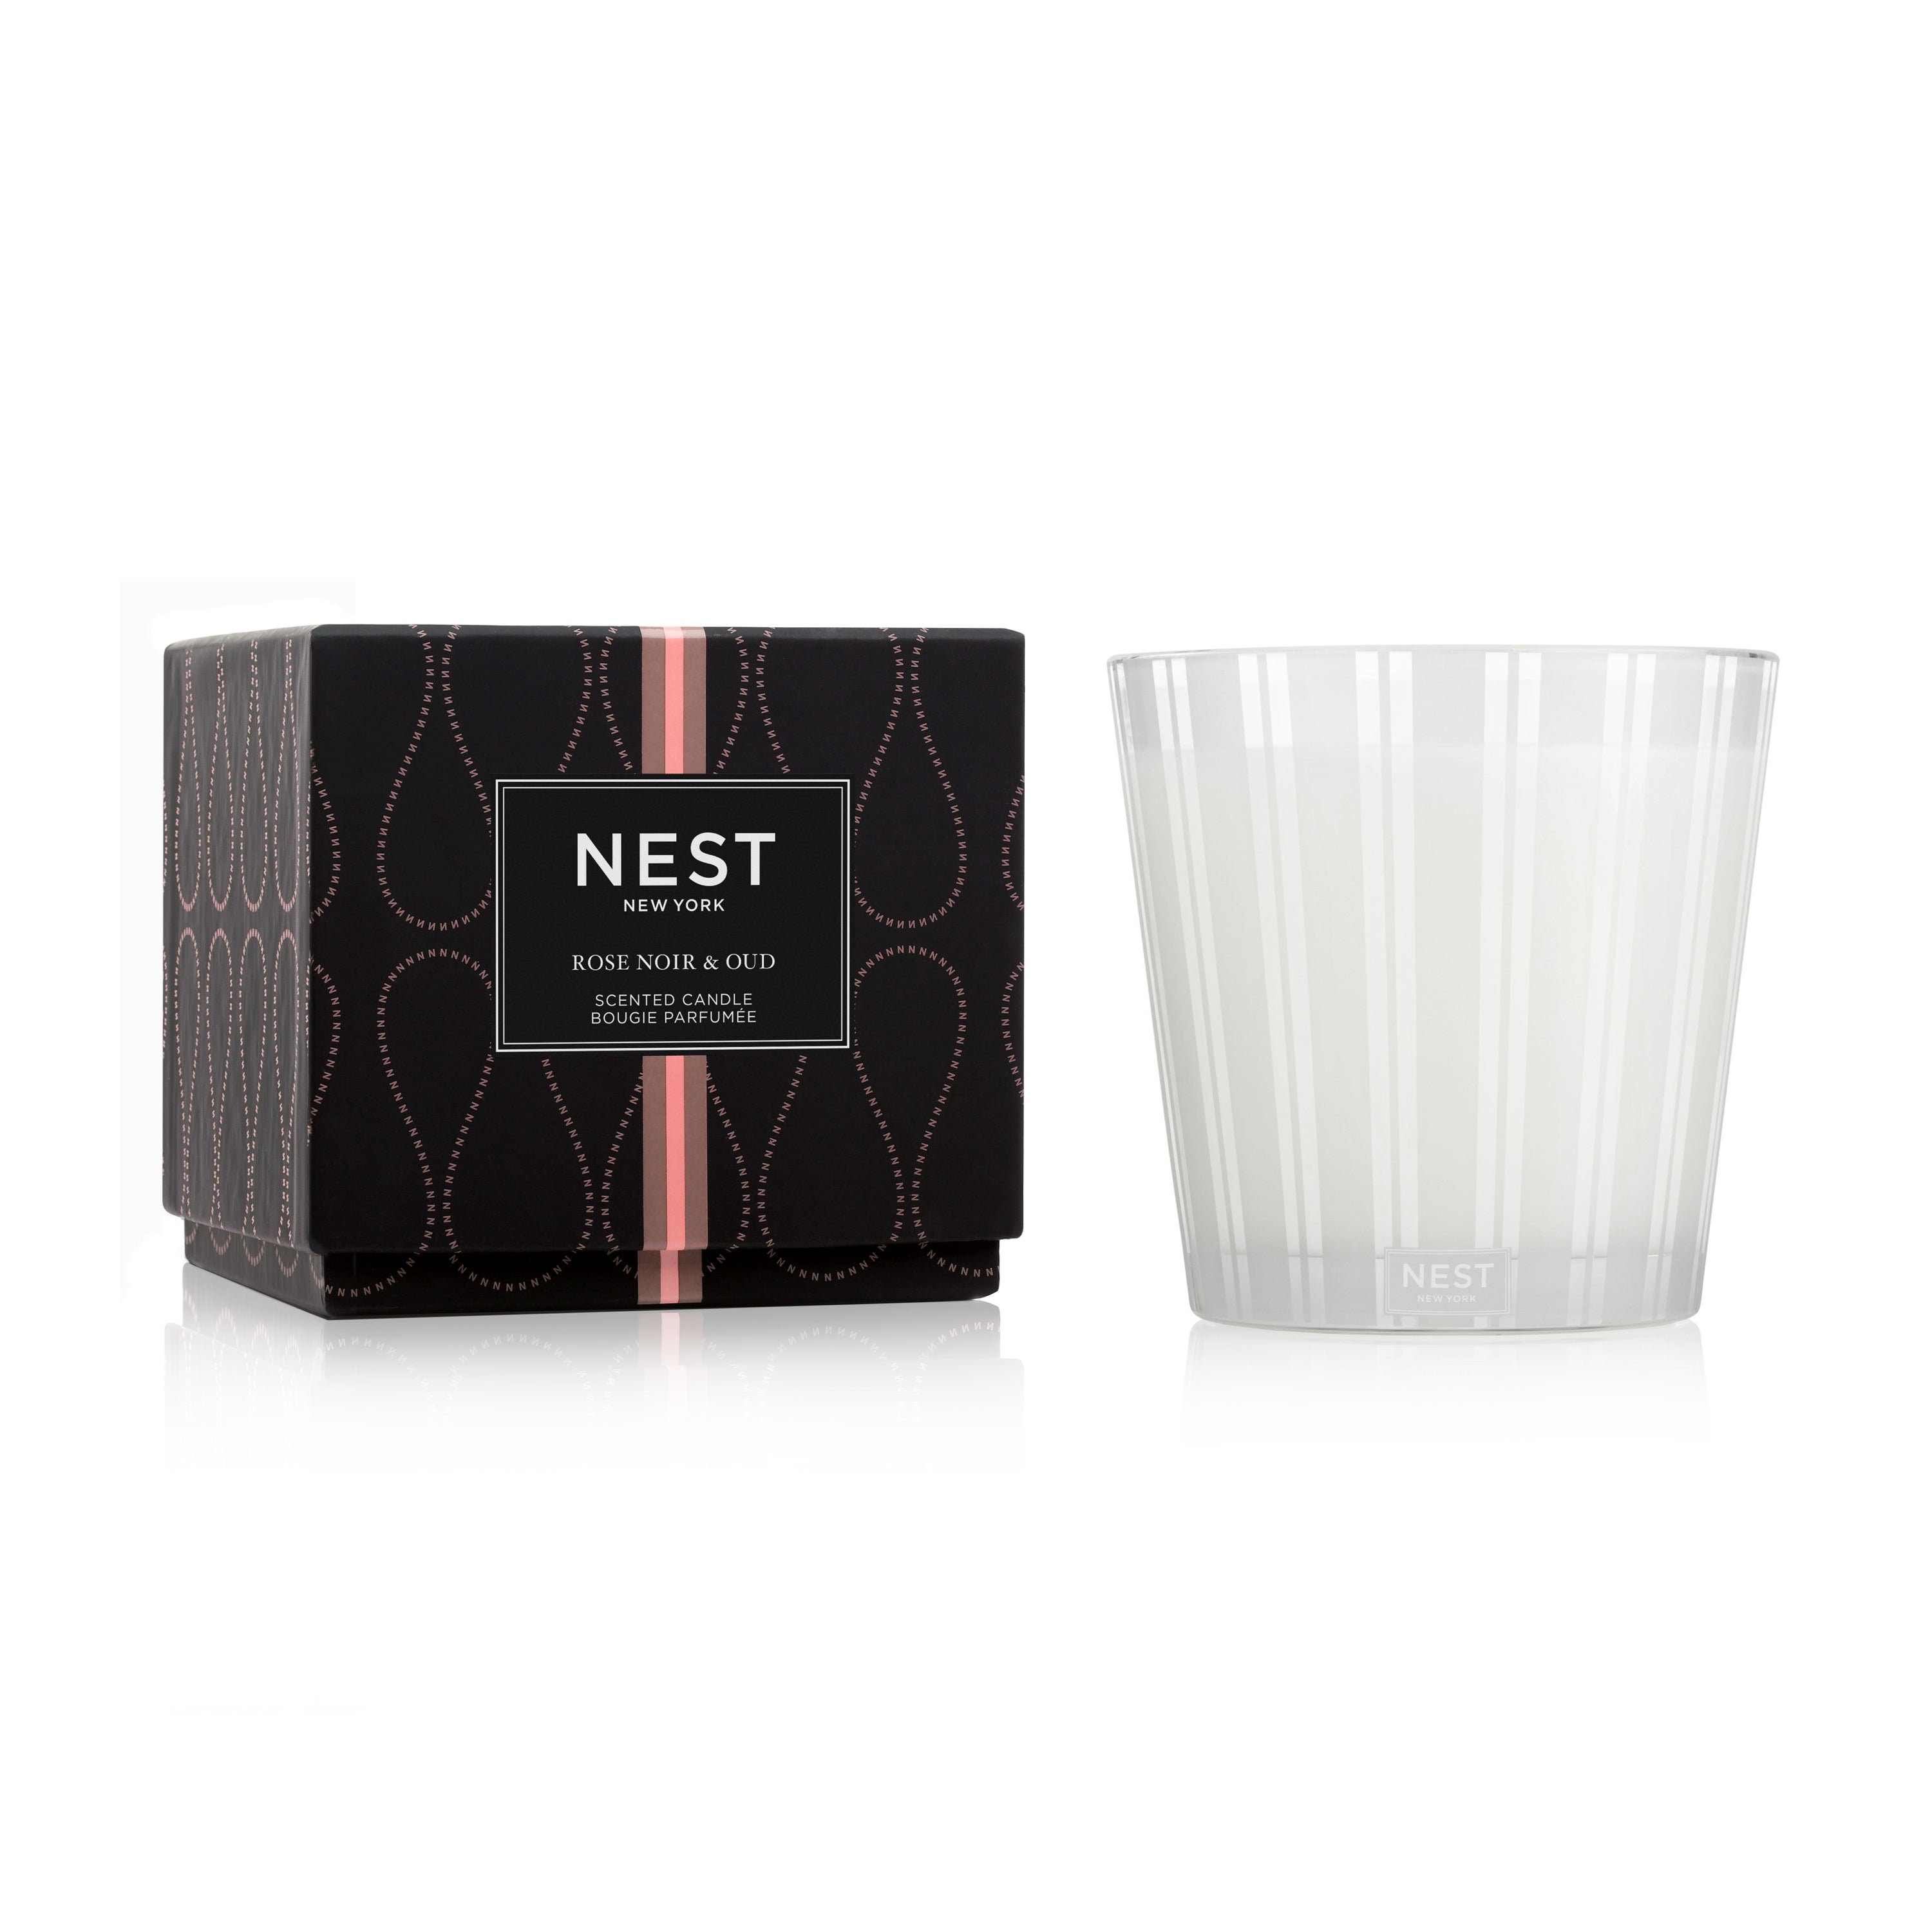 Rose Noir & Oud 3-Wick  21.2 oz Candle by Nest New York